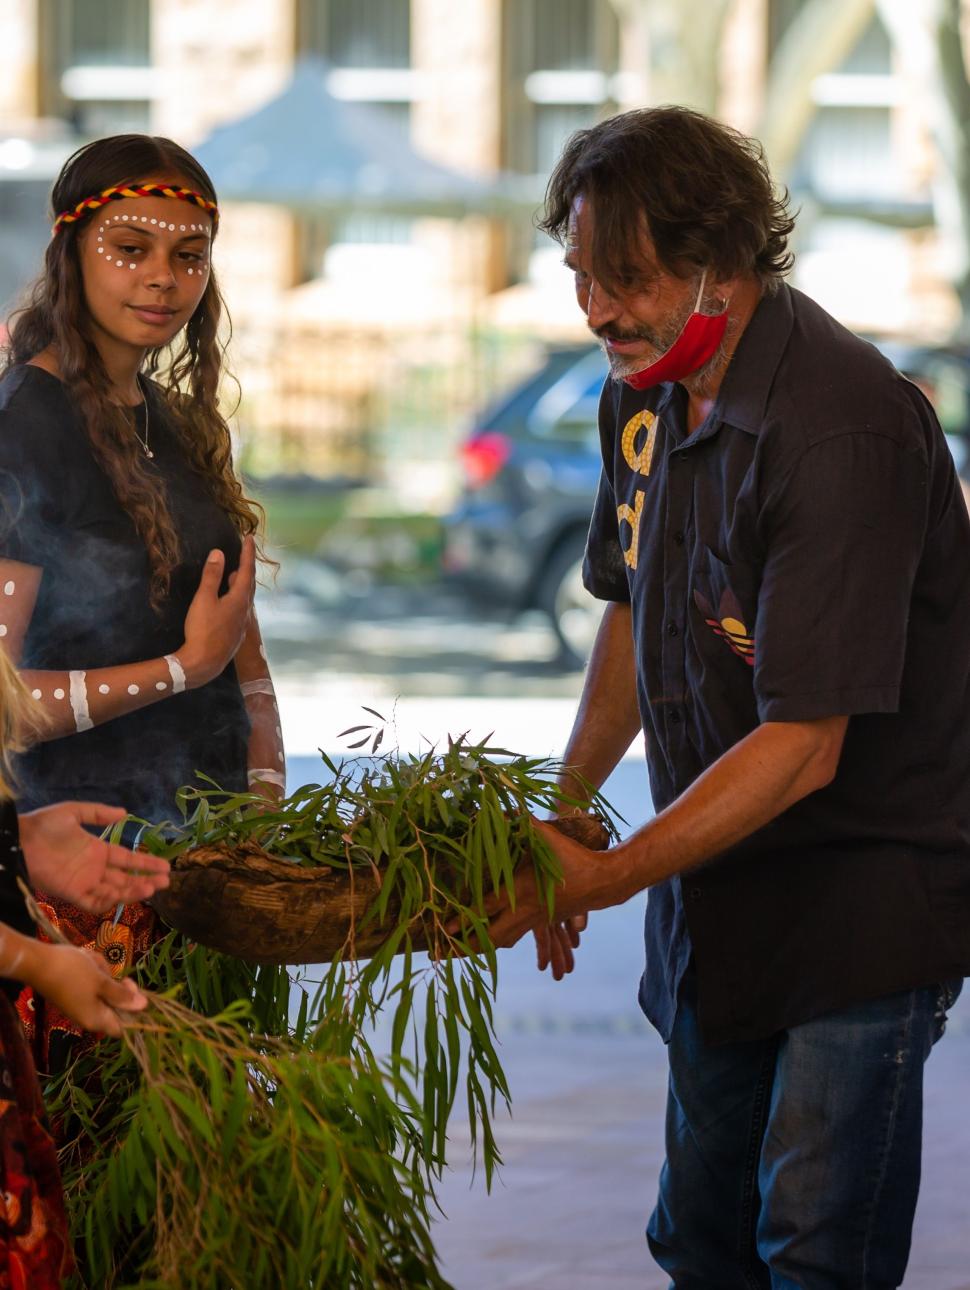 Derek with two girls at a smoking ceremony